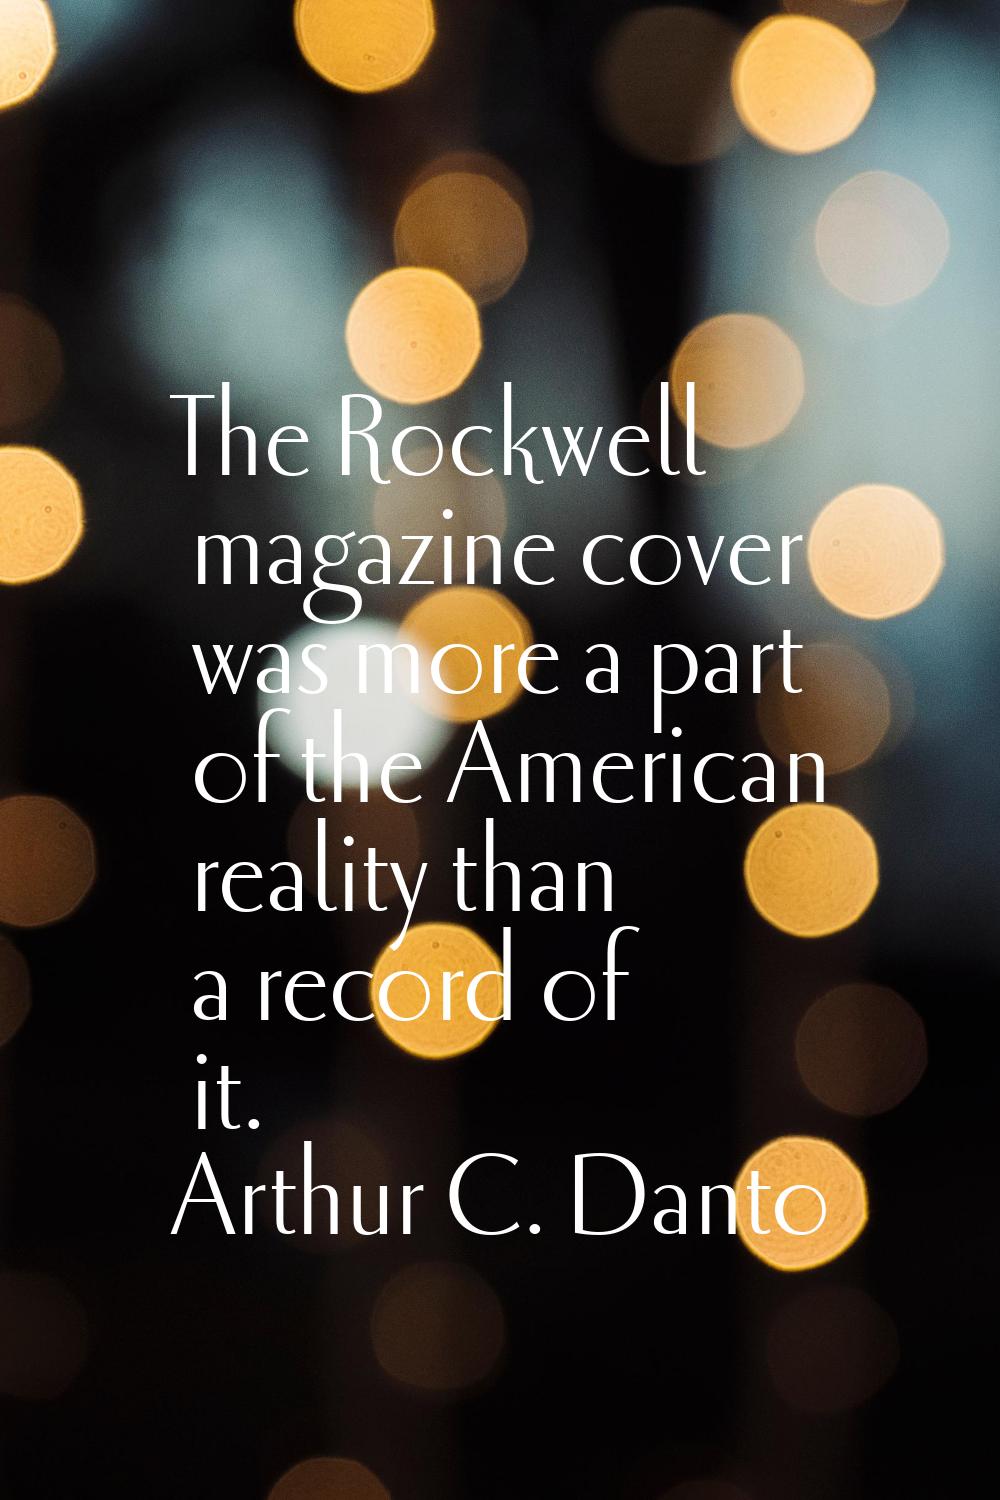 The Rockwell magazine cover was more a part of the American reality than a record of it.